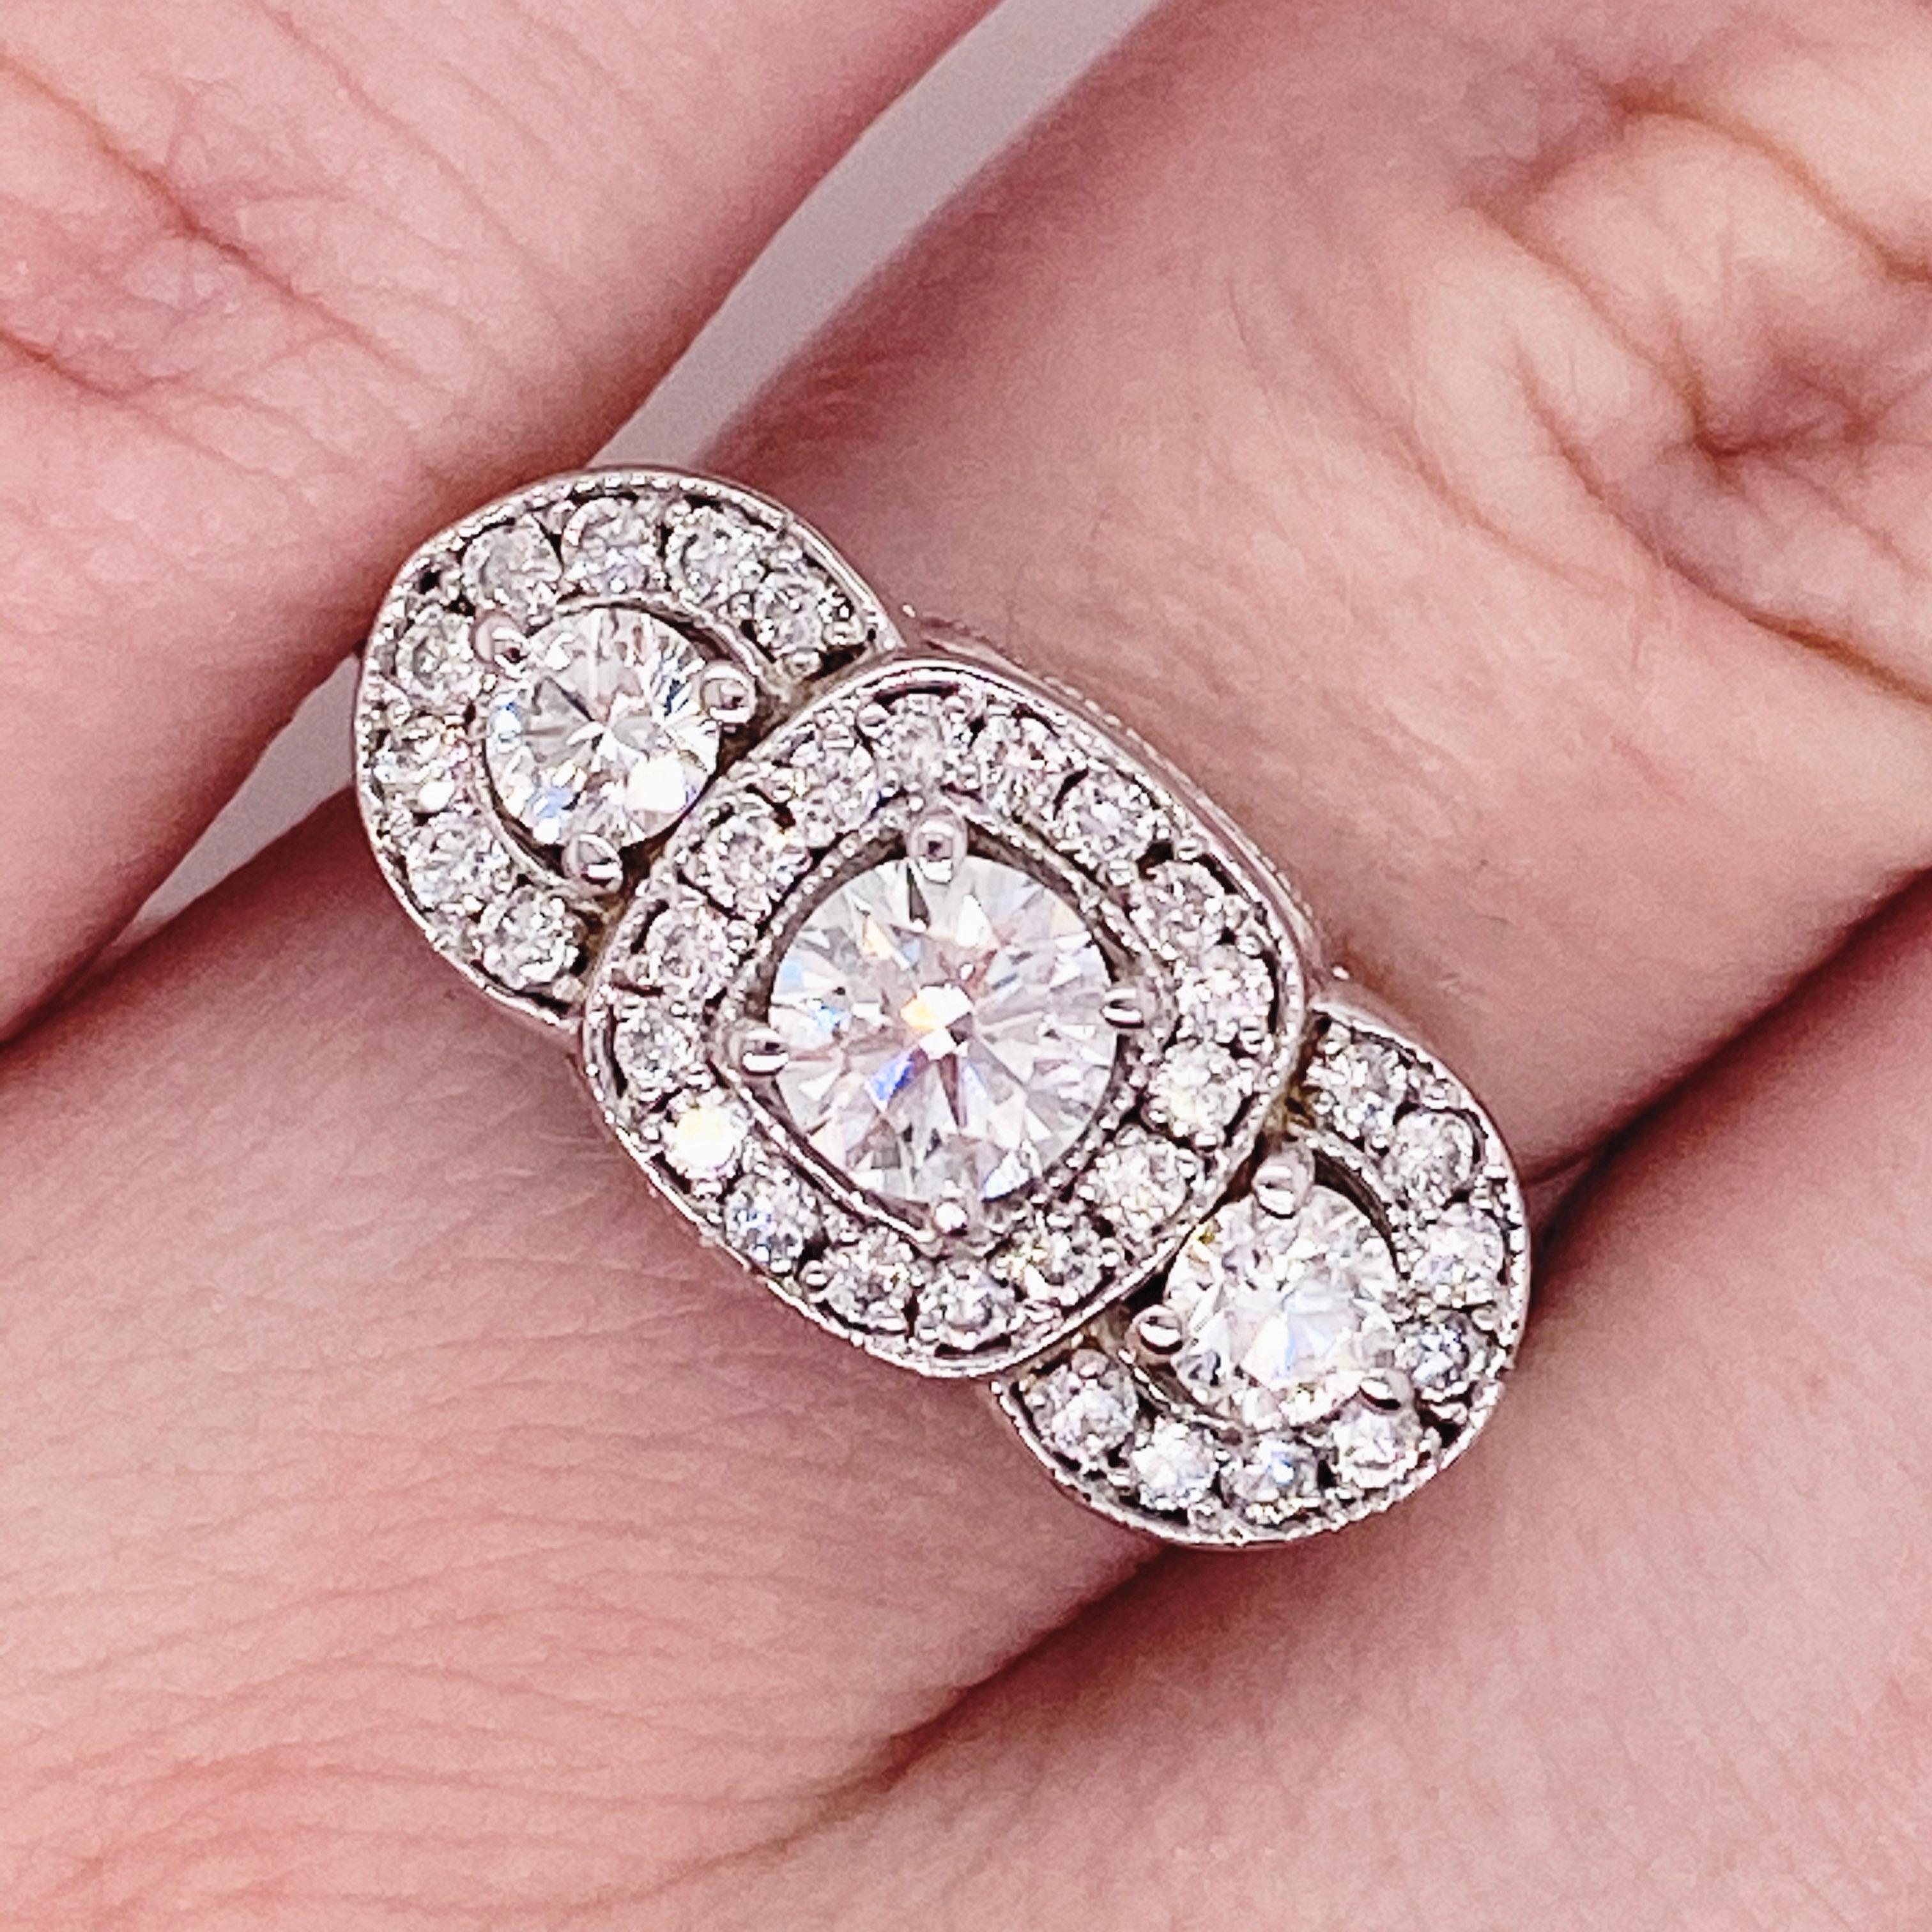 This stunningly beautiful three stone diamond engagement ring would make anyone thrilled to receive it!  These brilliant diamonds set in polished 14k white gold provides a look that is very modern and classic at the same time! This ring is very